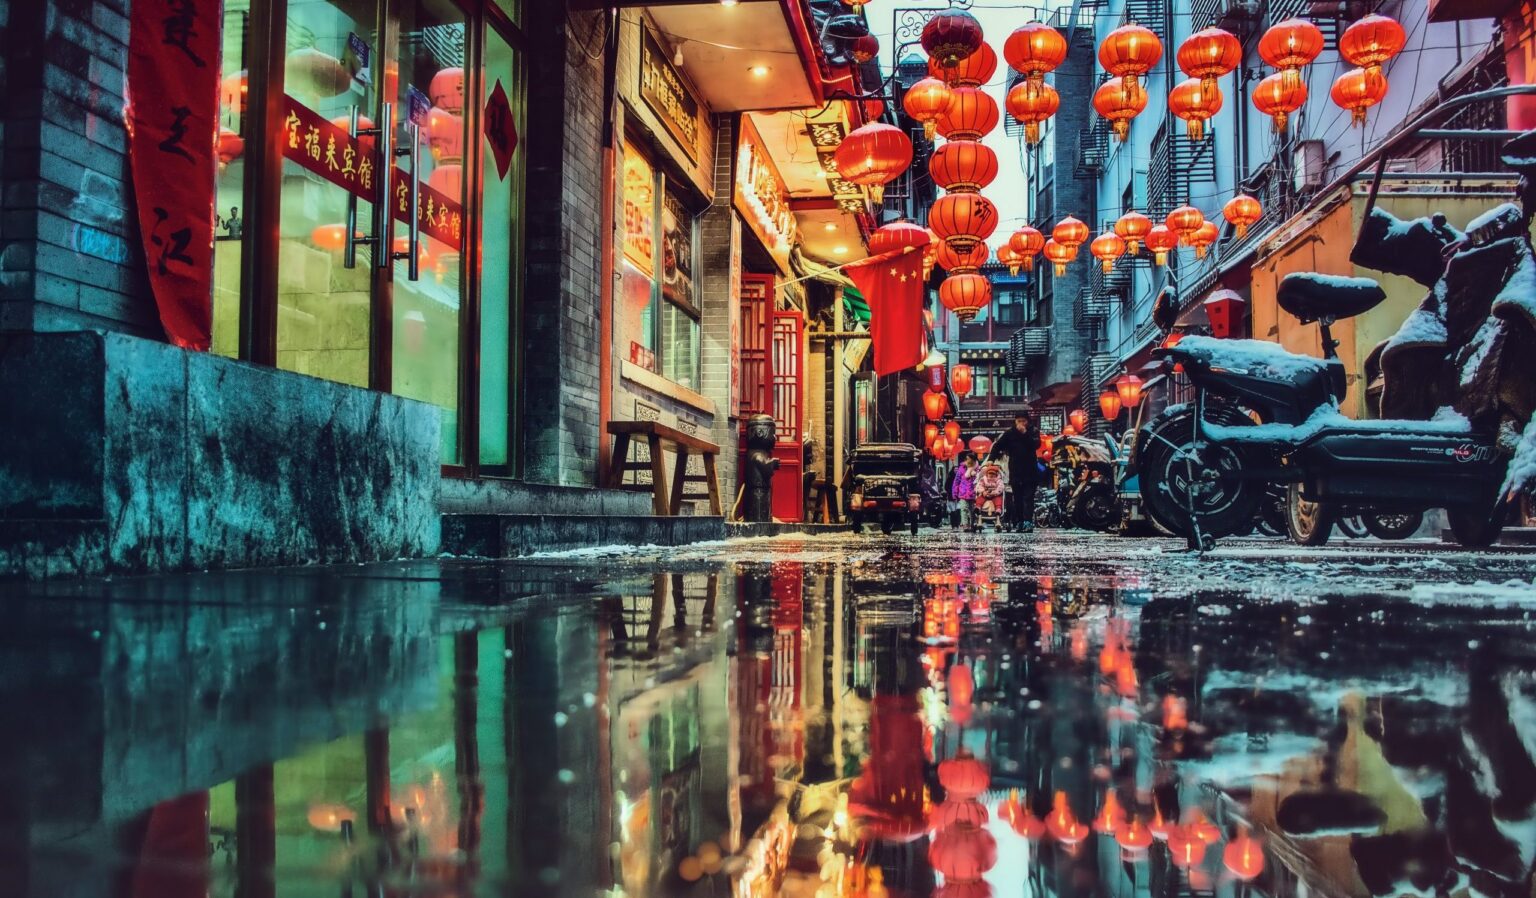 5 tips on how to prepare for shipments during Chinese New Year 2020